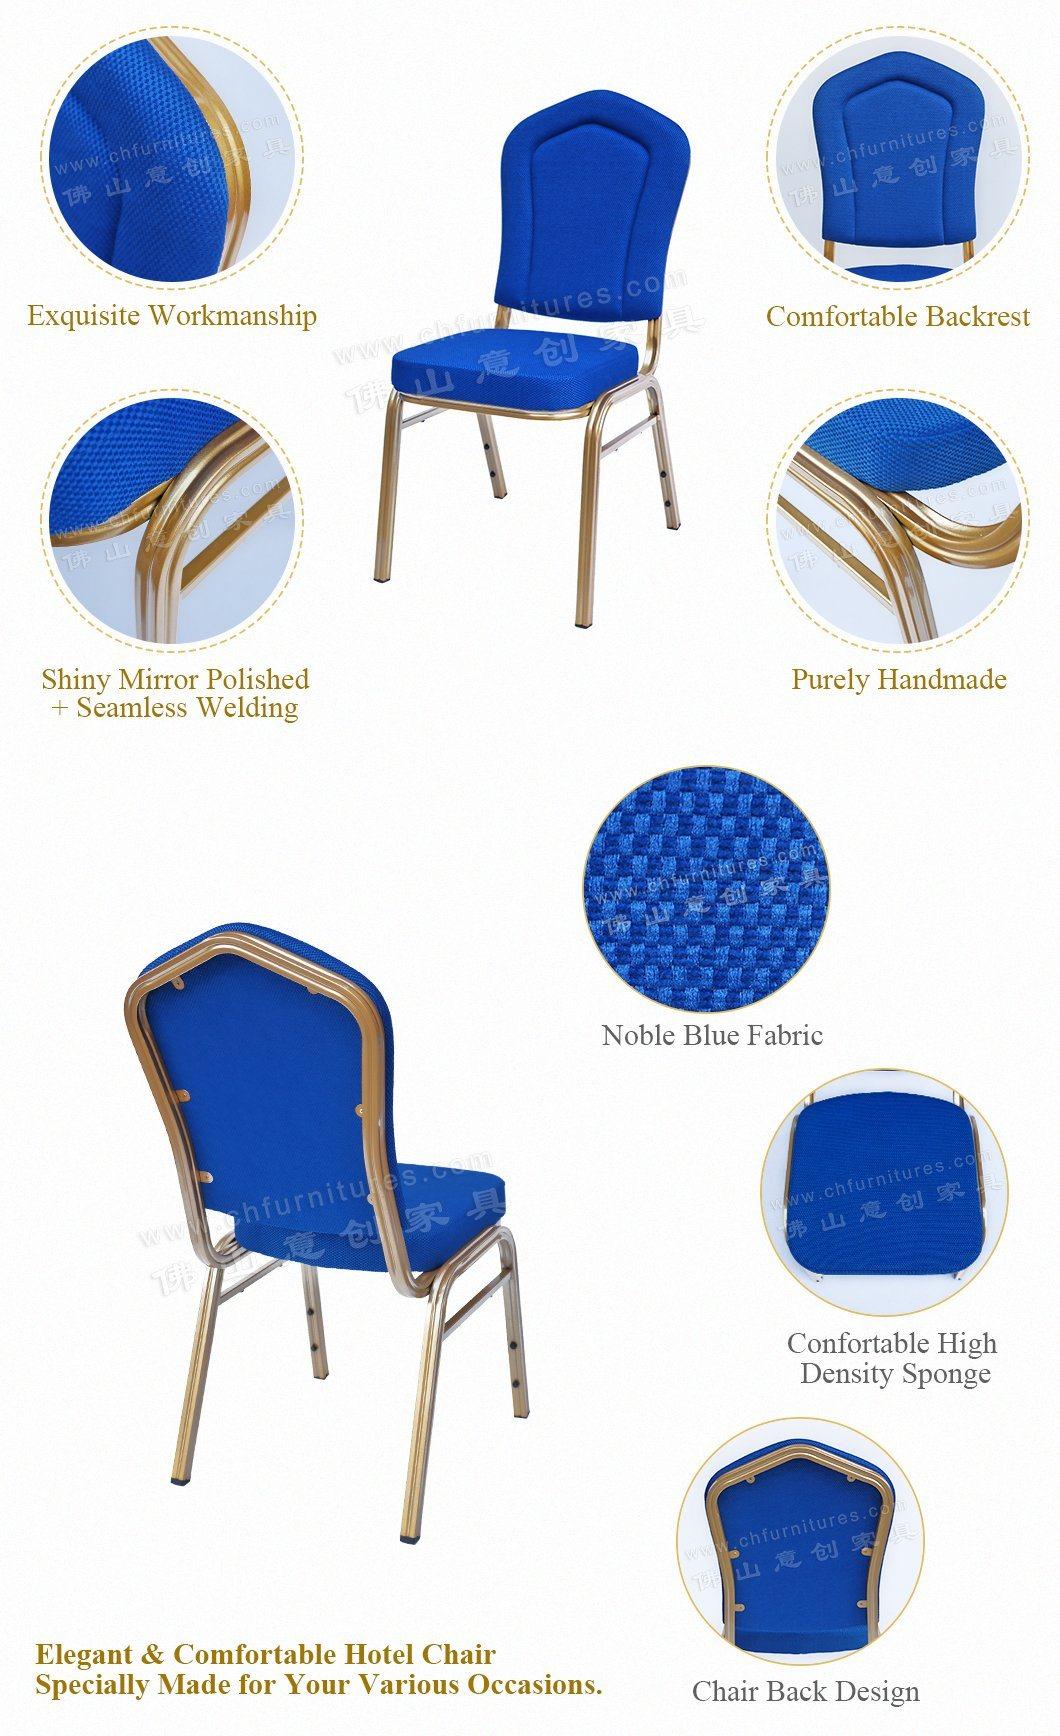 Yc-Zg44 Wholesale Iron Wedding Meeting Chair for Event